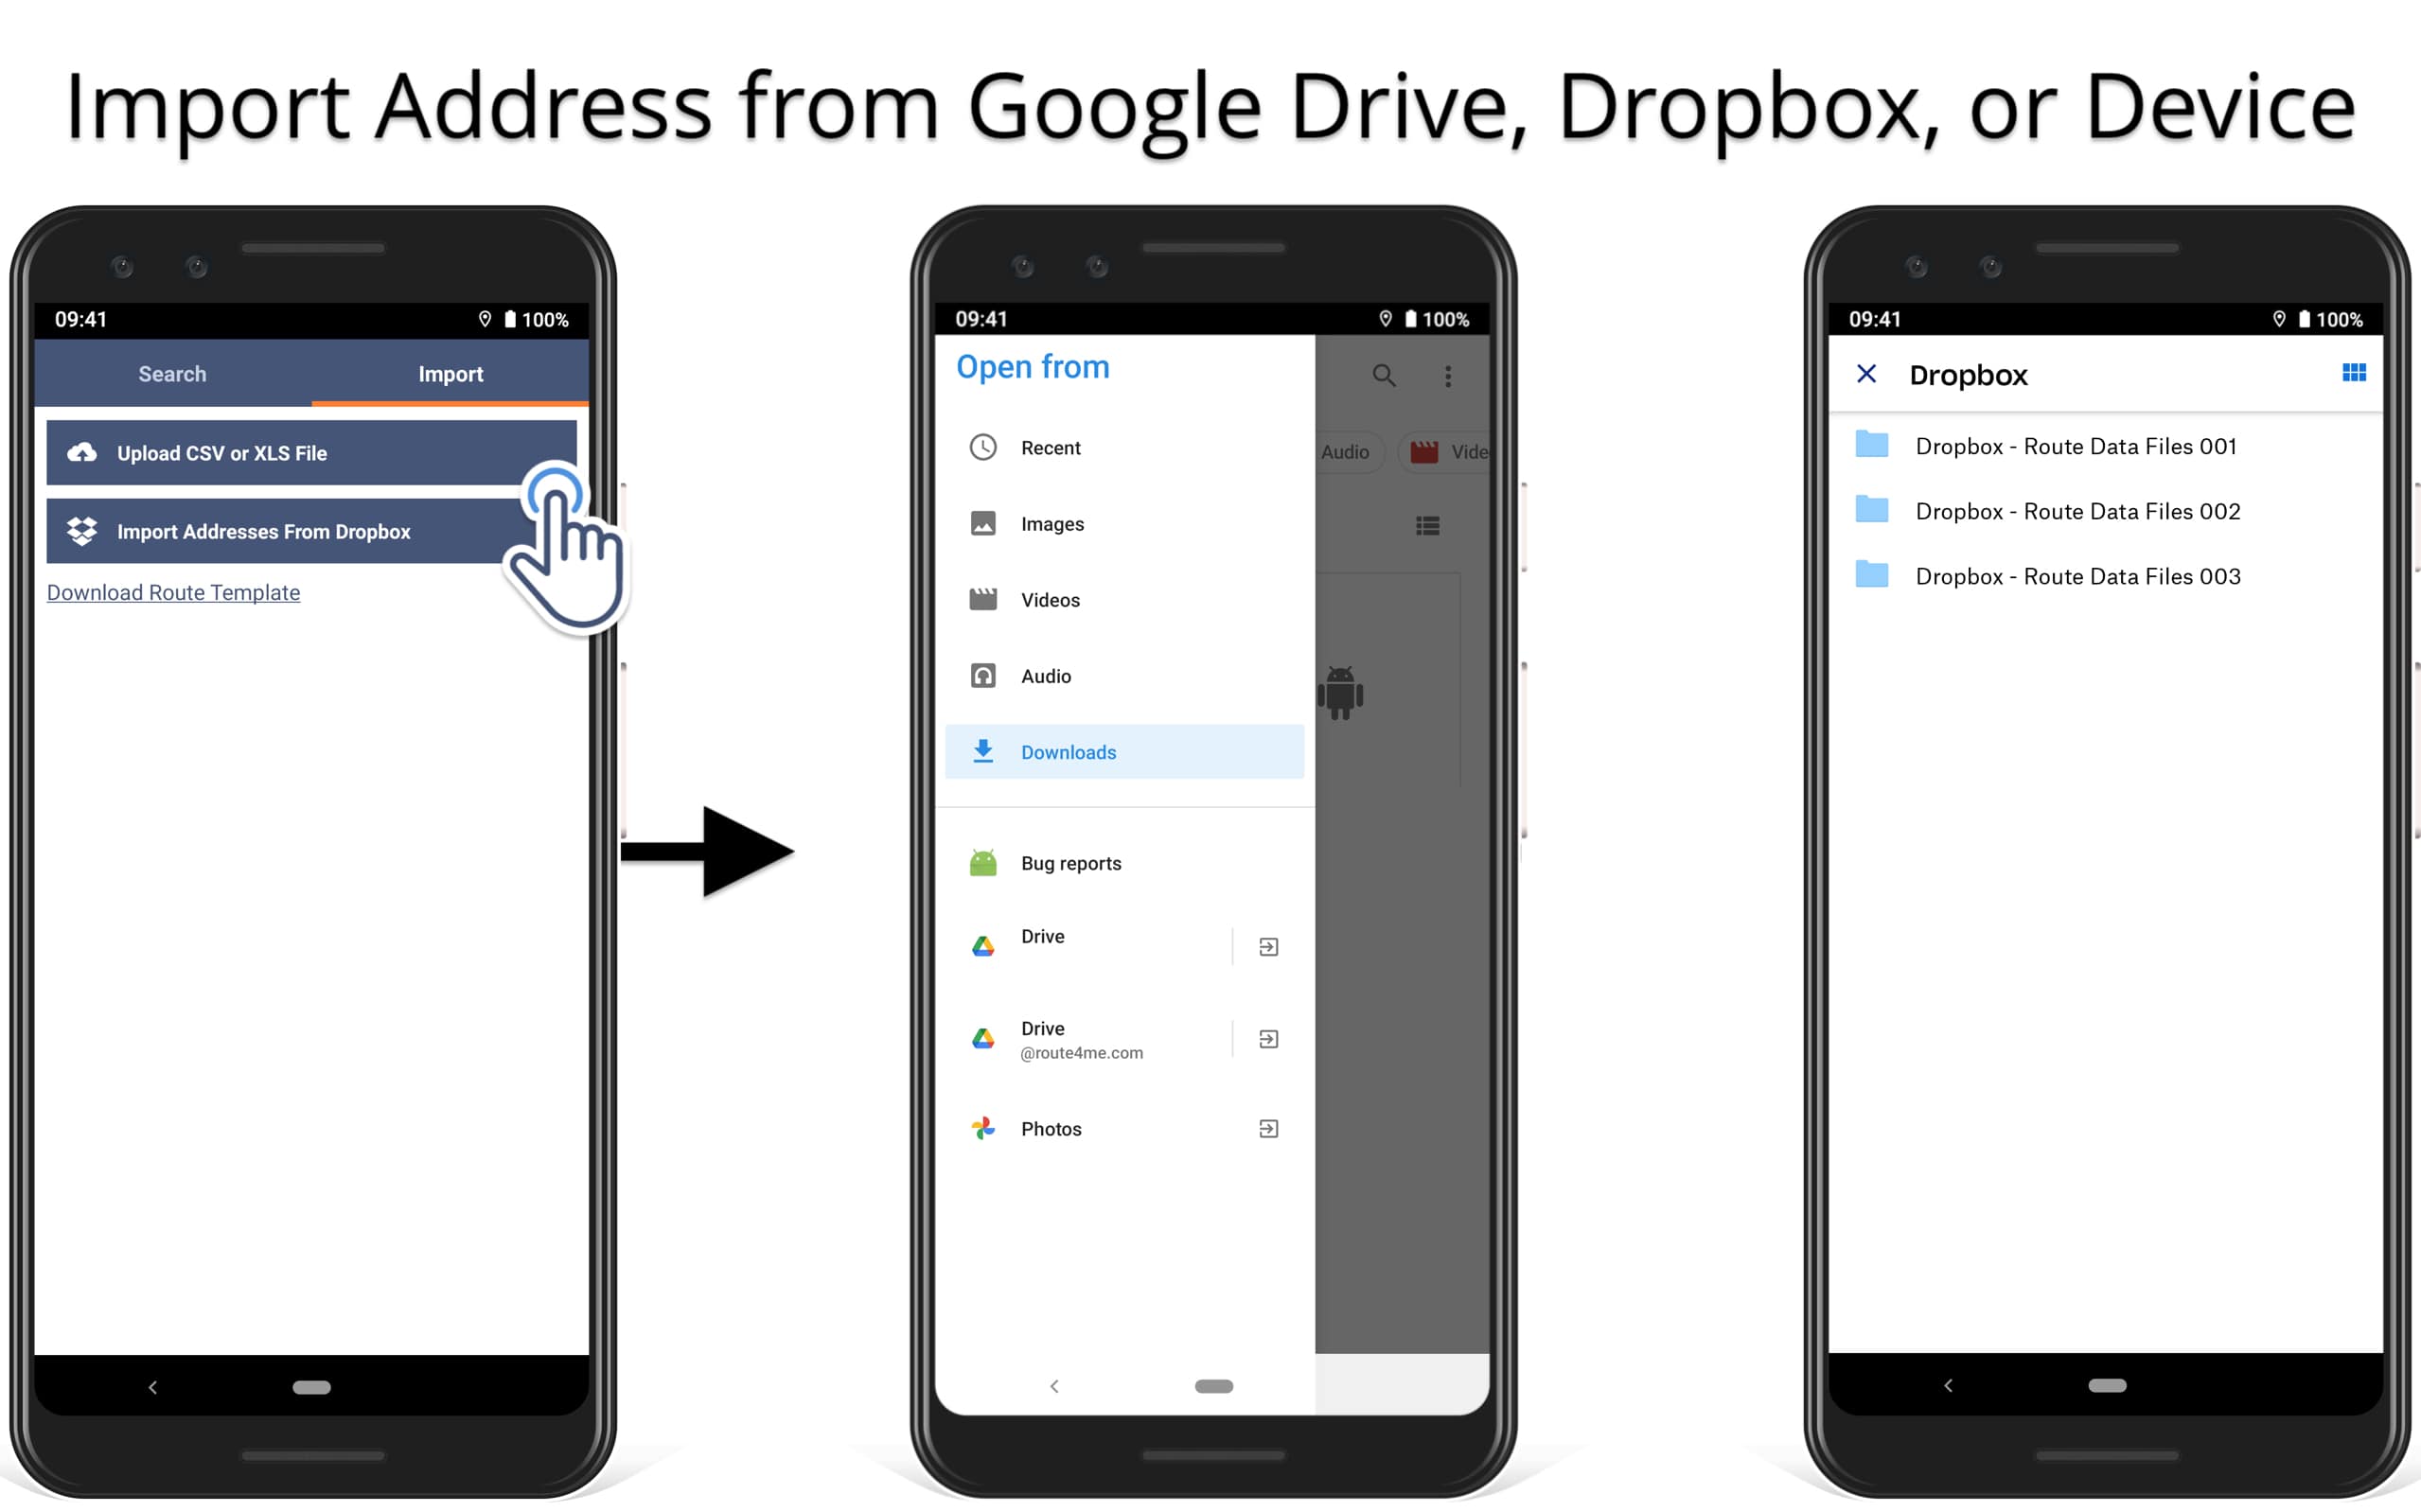 Import addresses from Google Drive, Dropbox, and your Android device into route planner